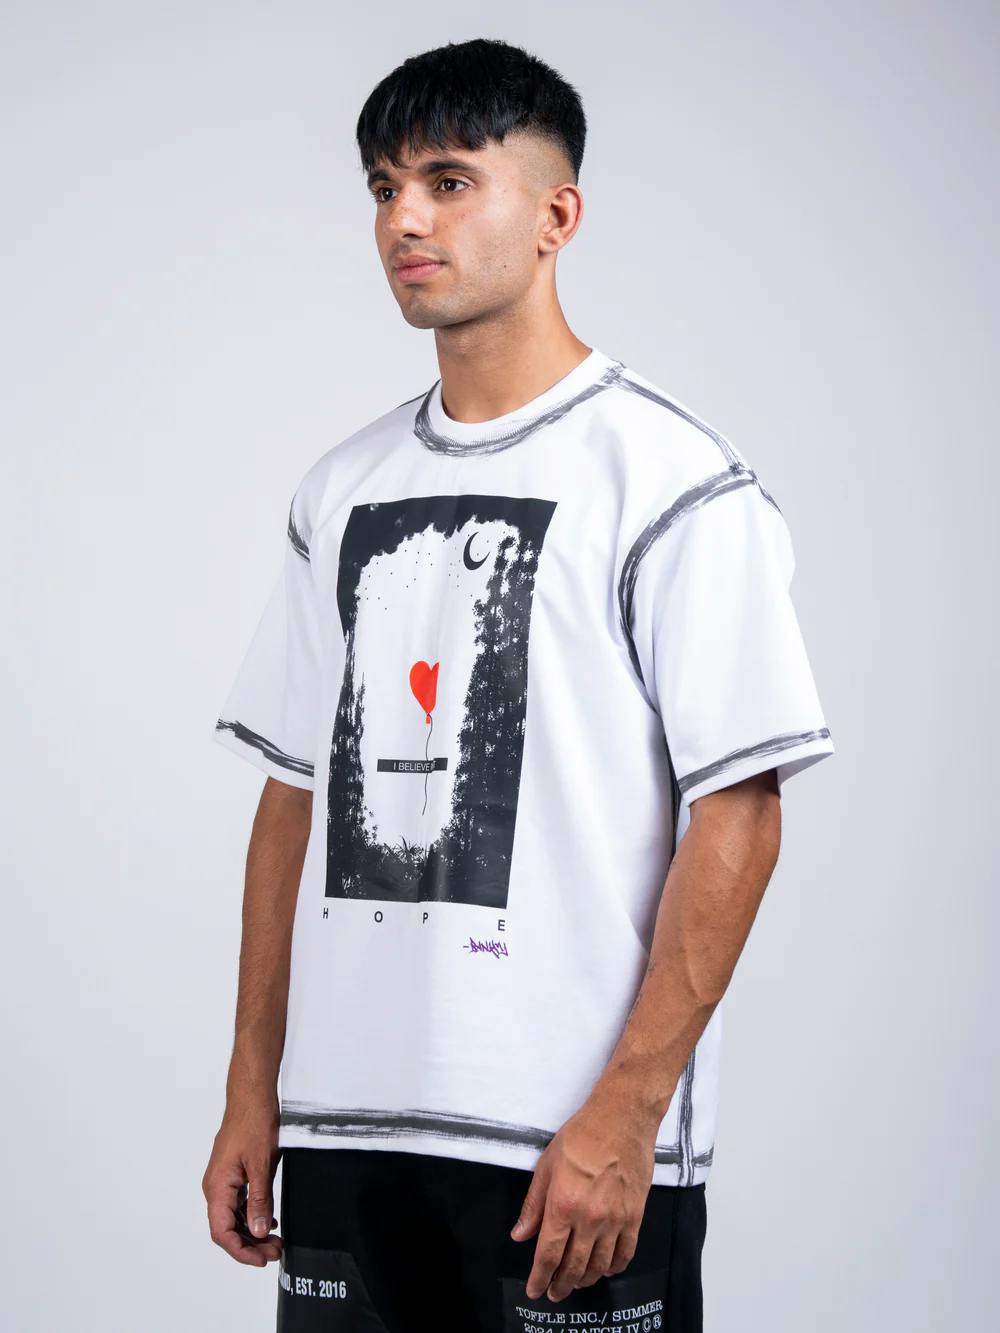 Brushed Banksy T-shirt, a product by TOFFLE